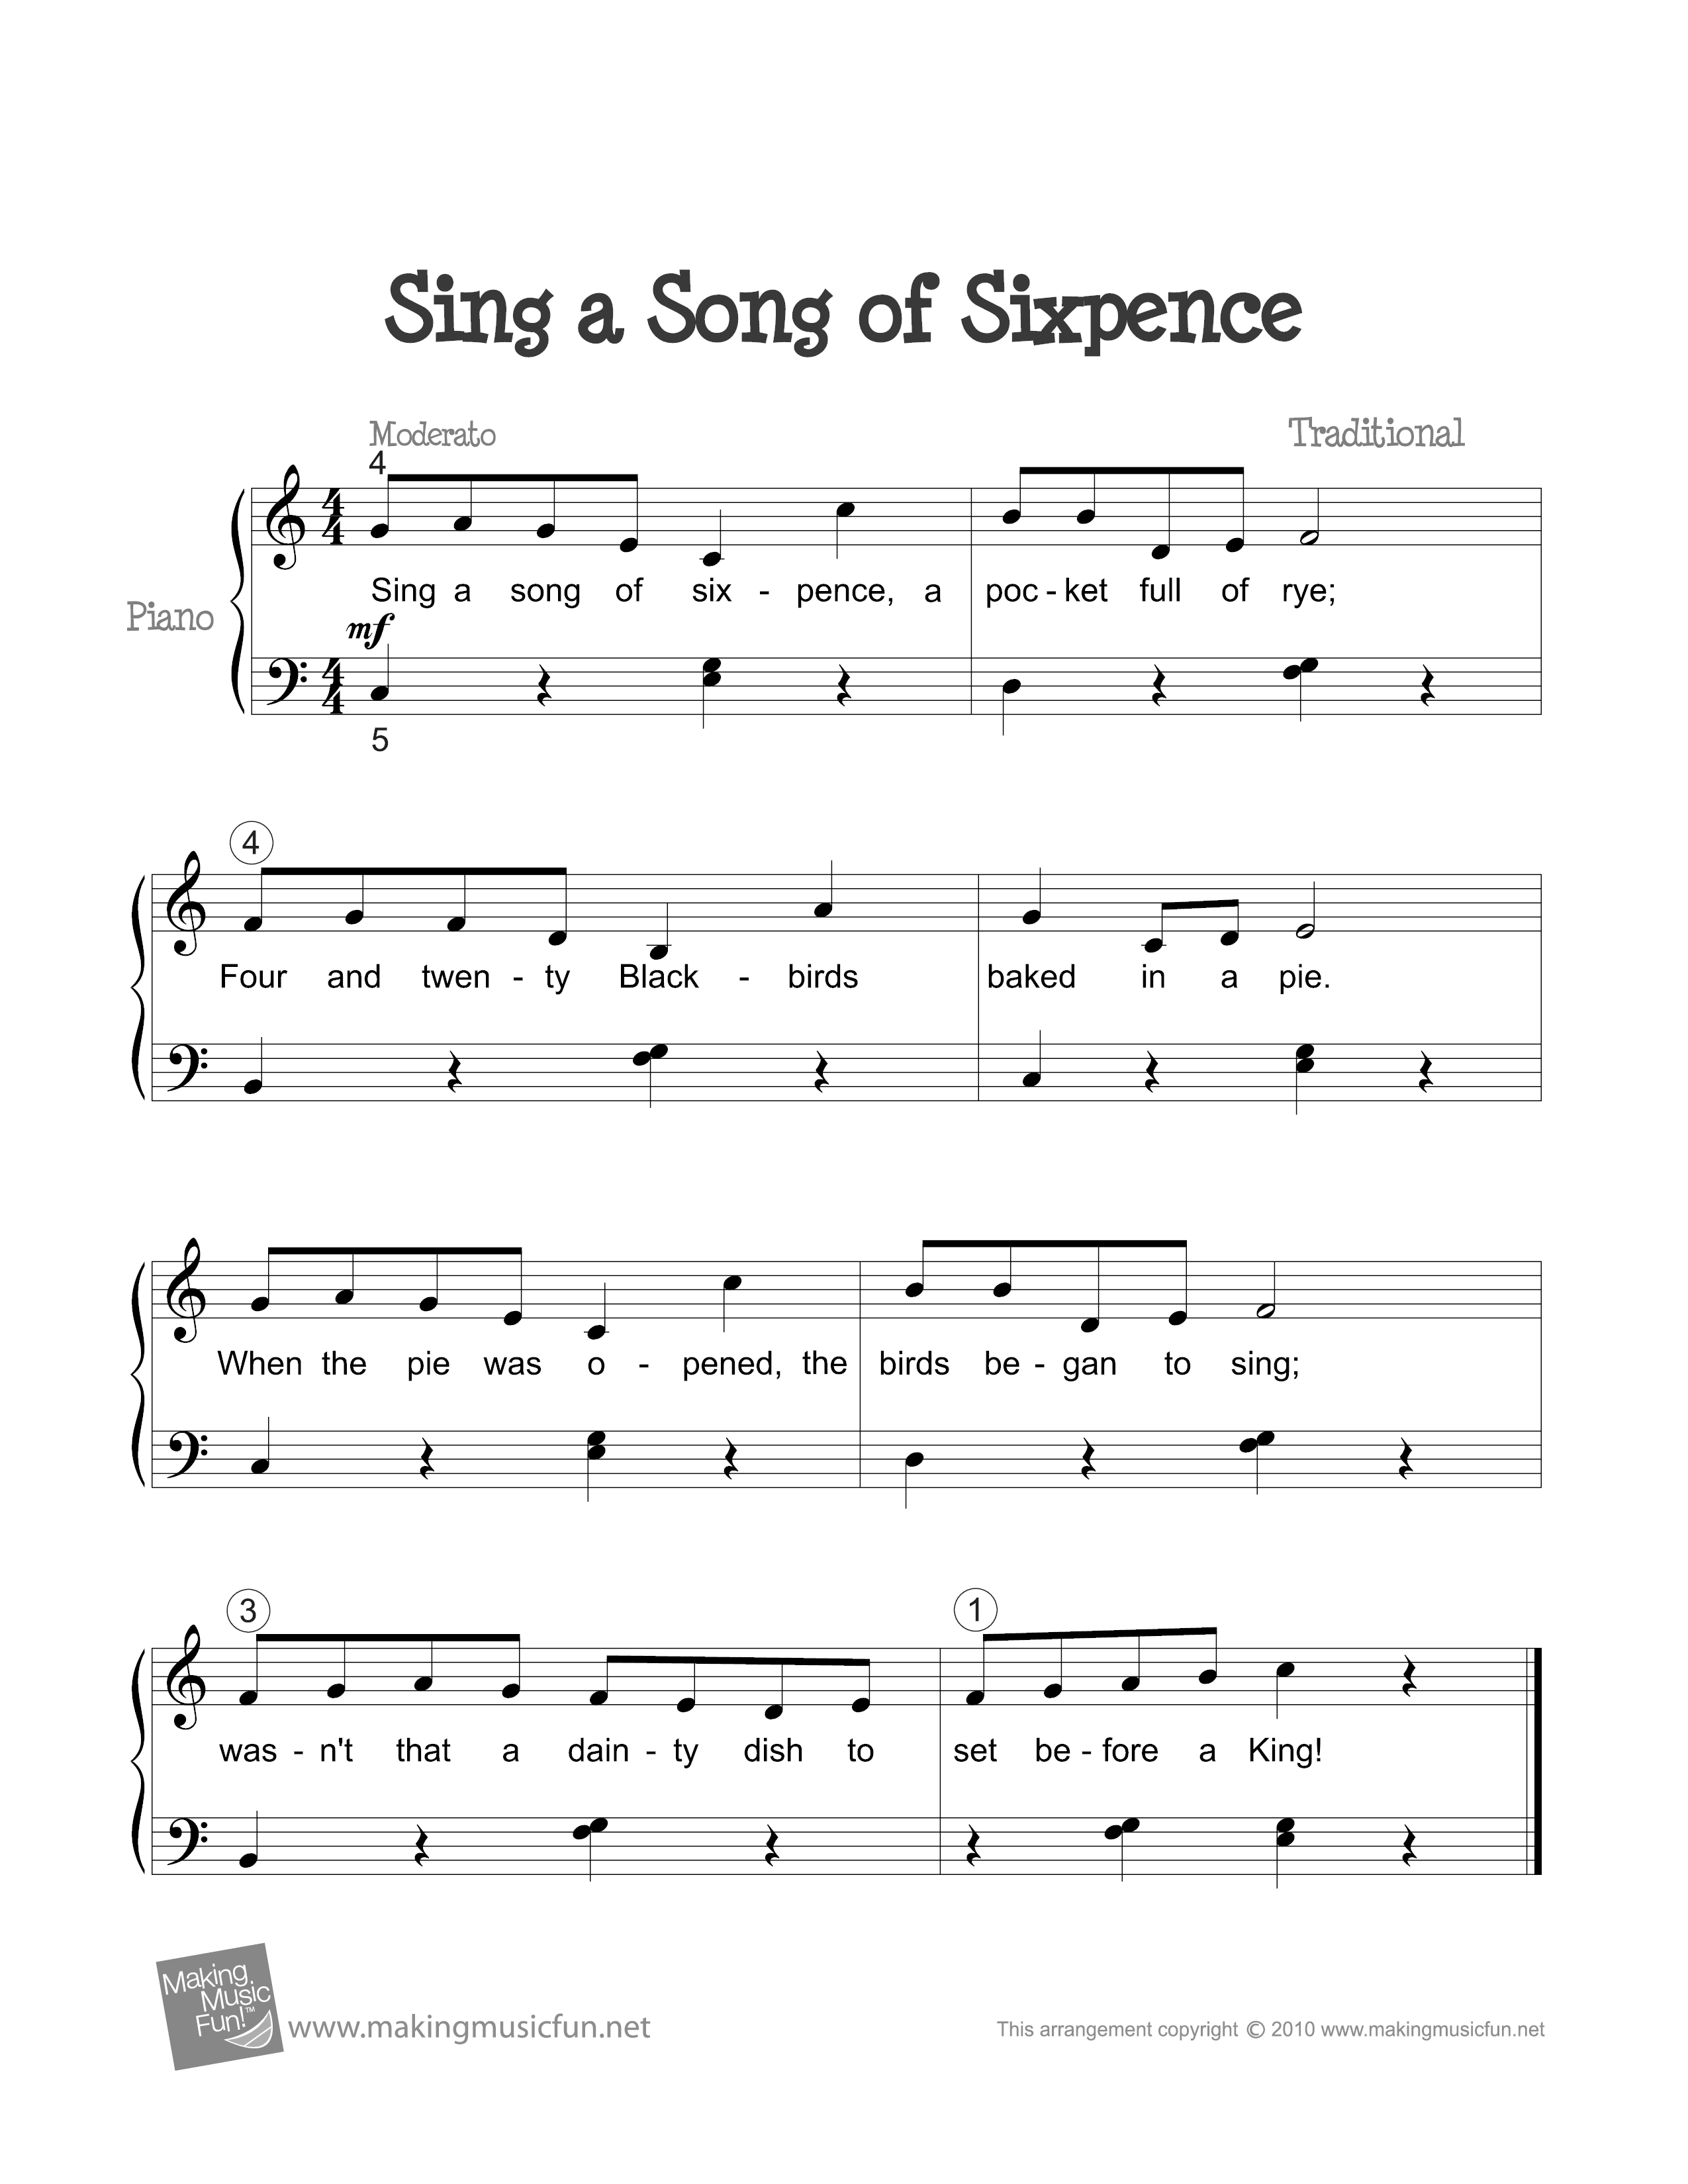 Sing a Song of Sixpence Score